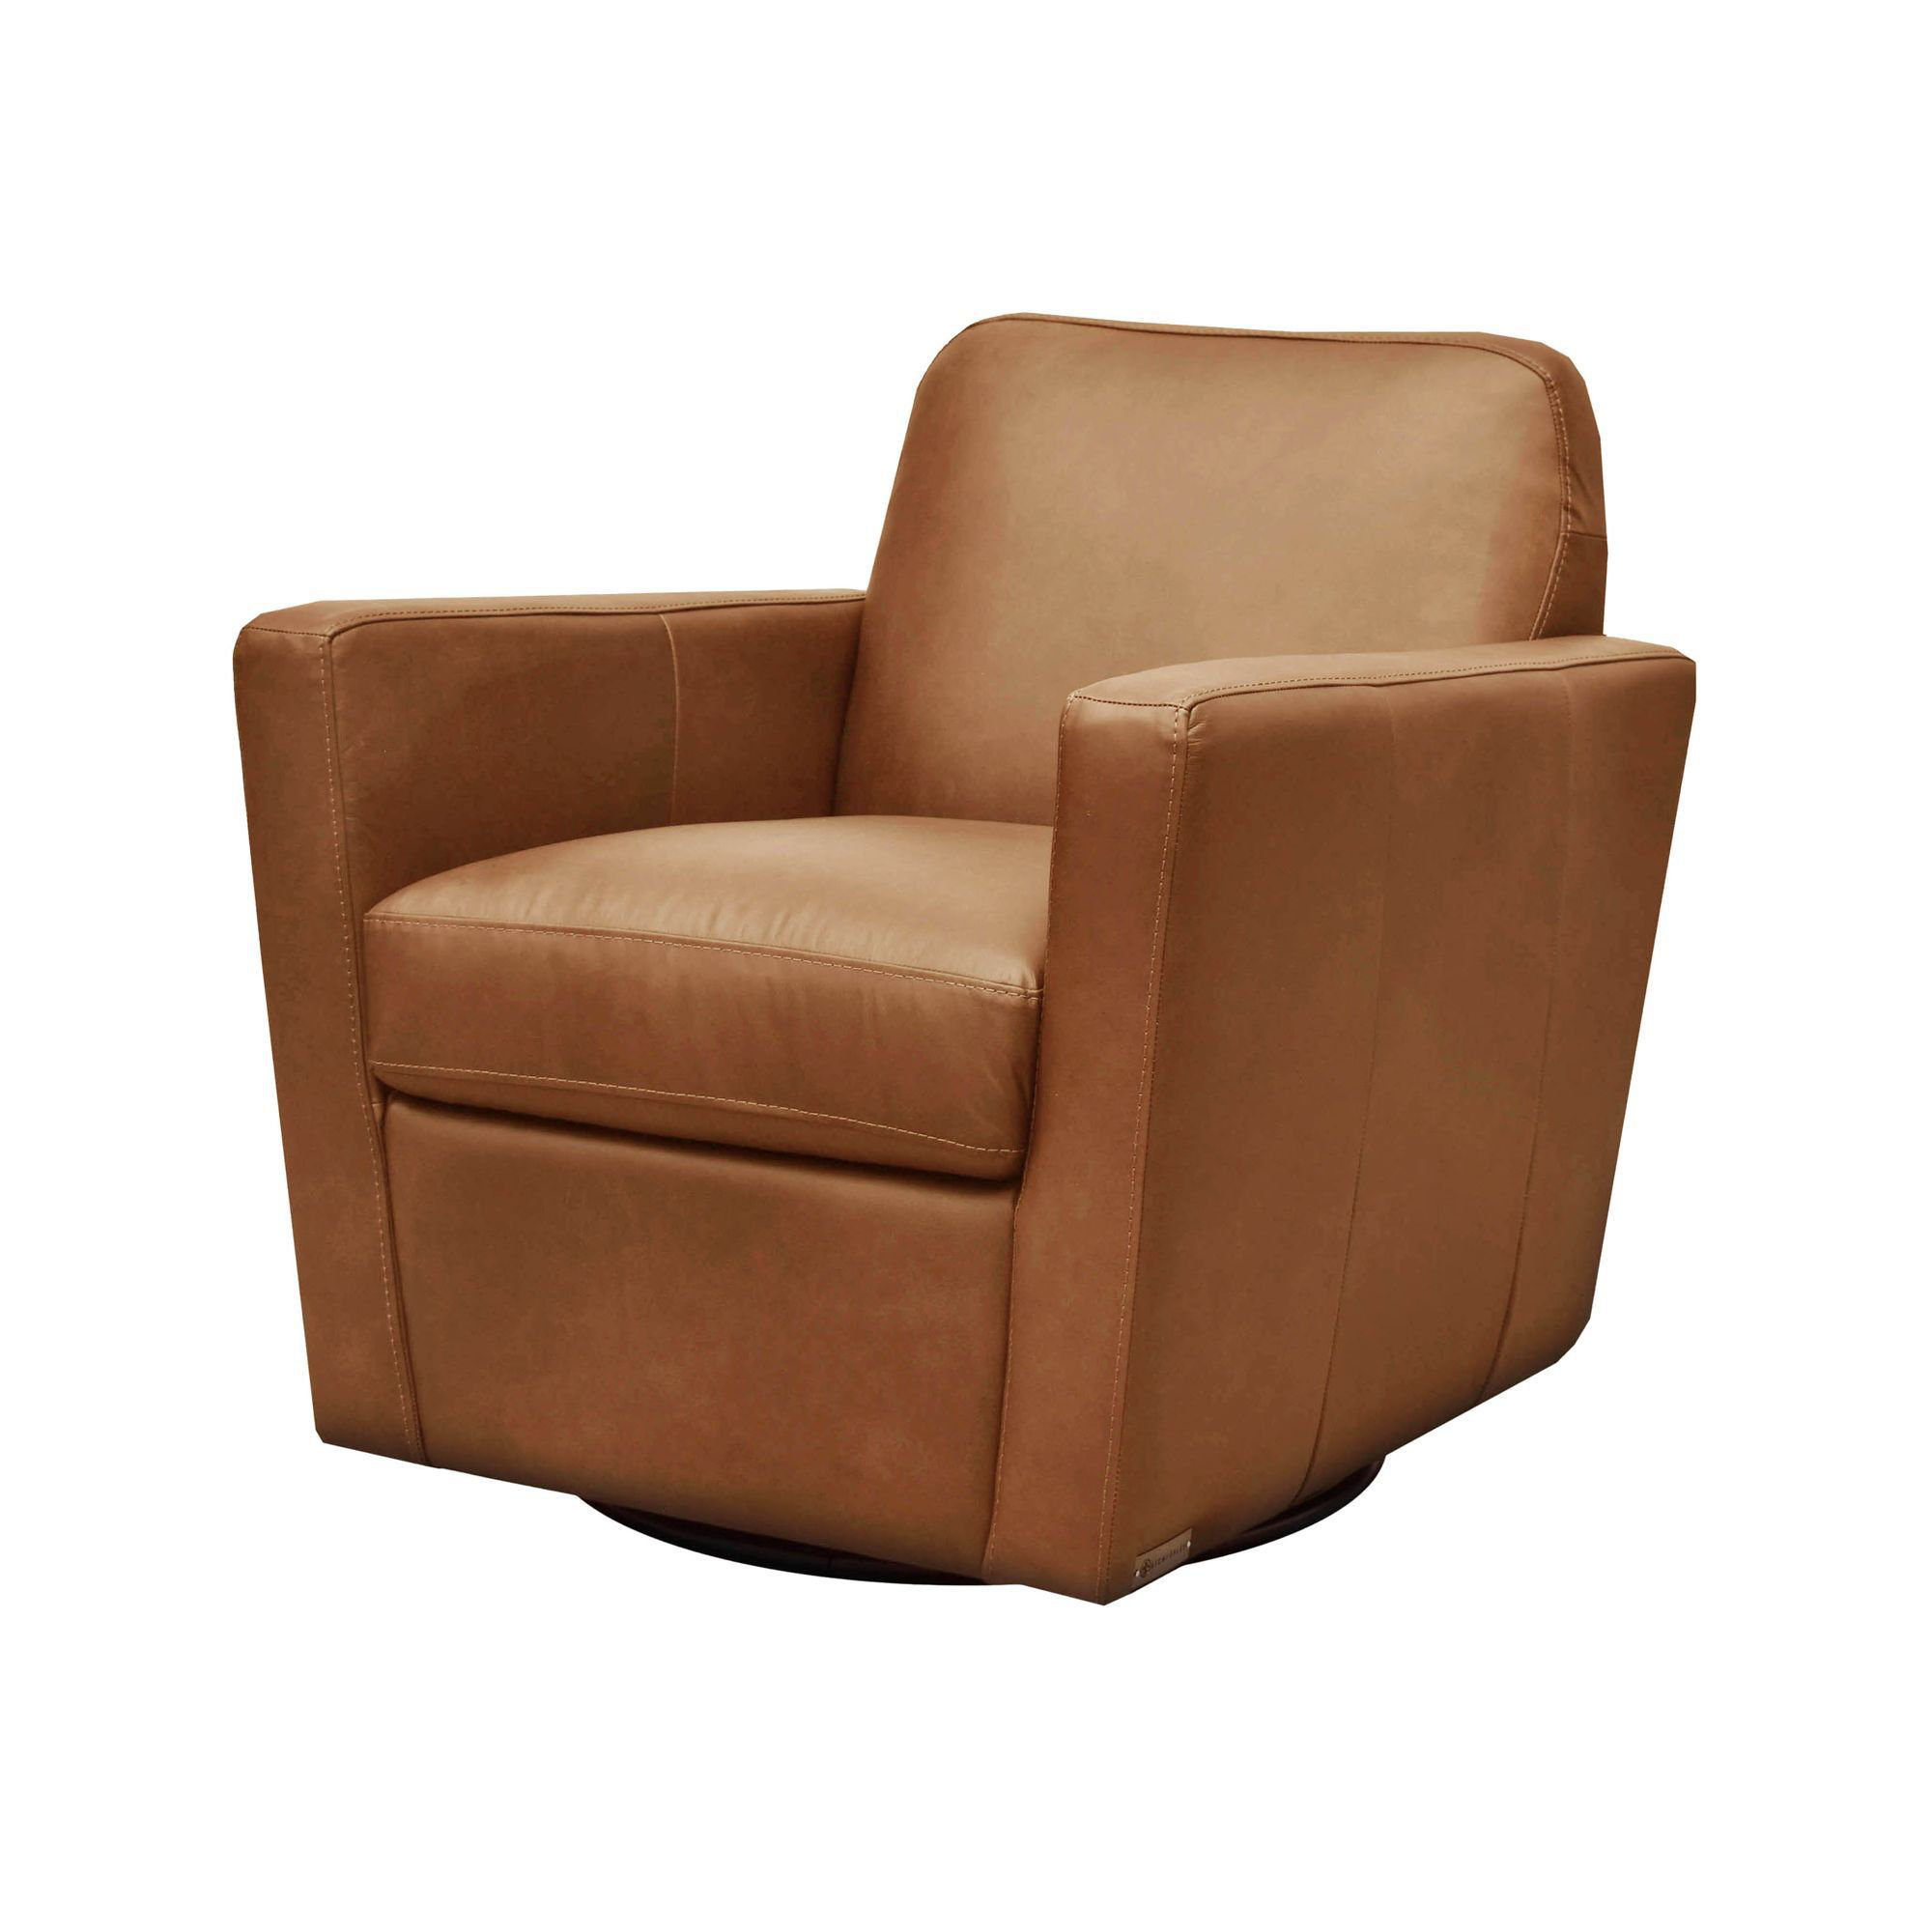 Wayfair Leather Monty Eclectic Chair Club | Home Swivel